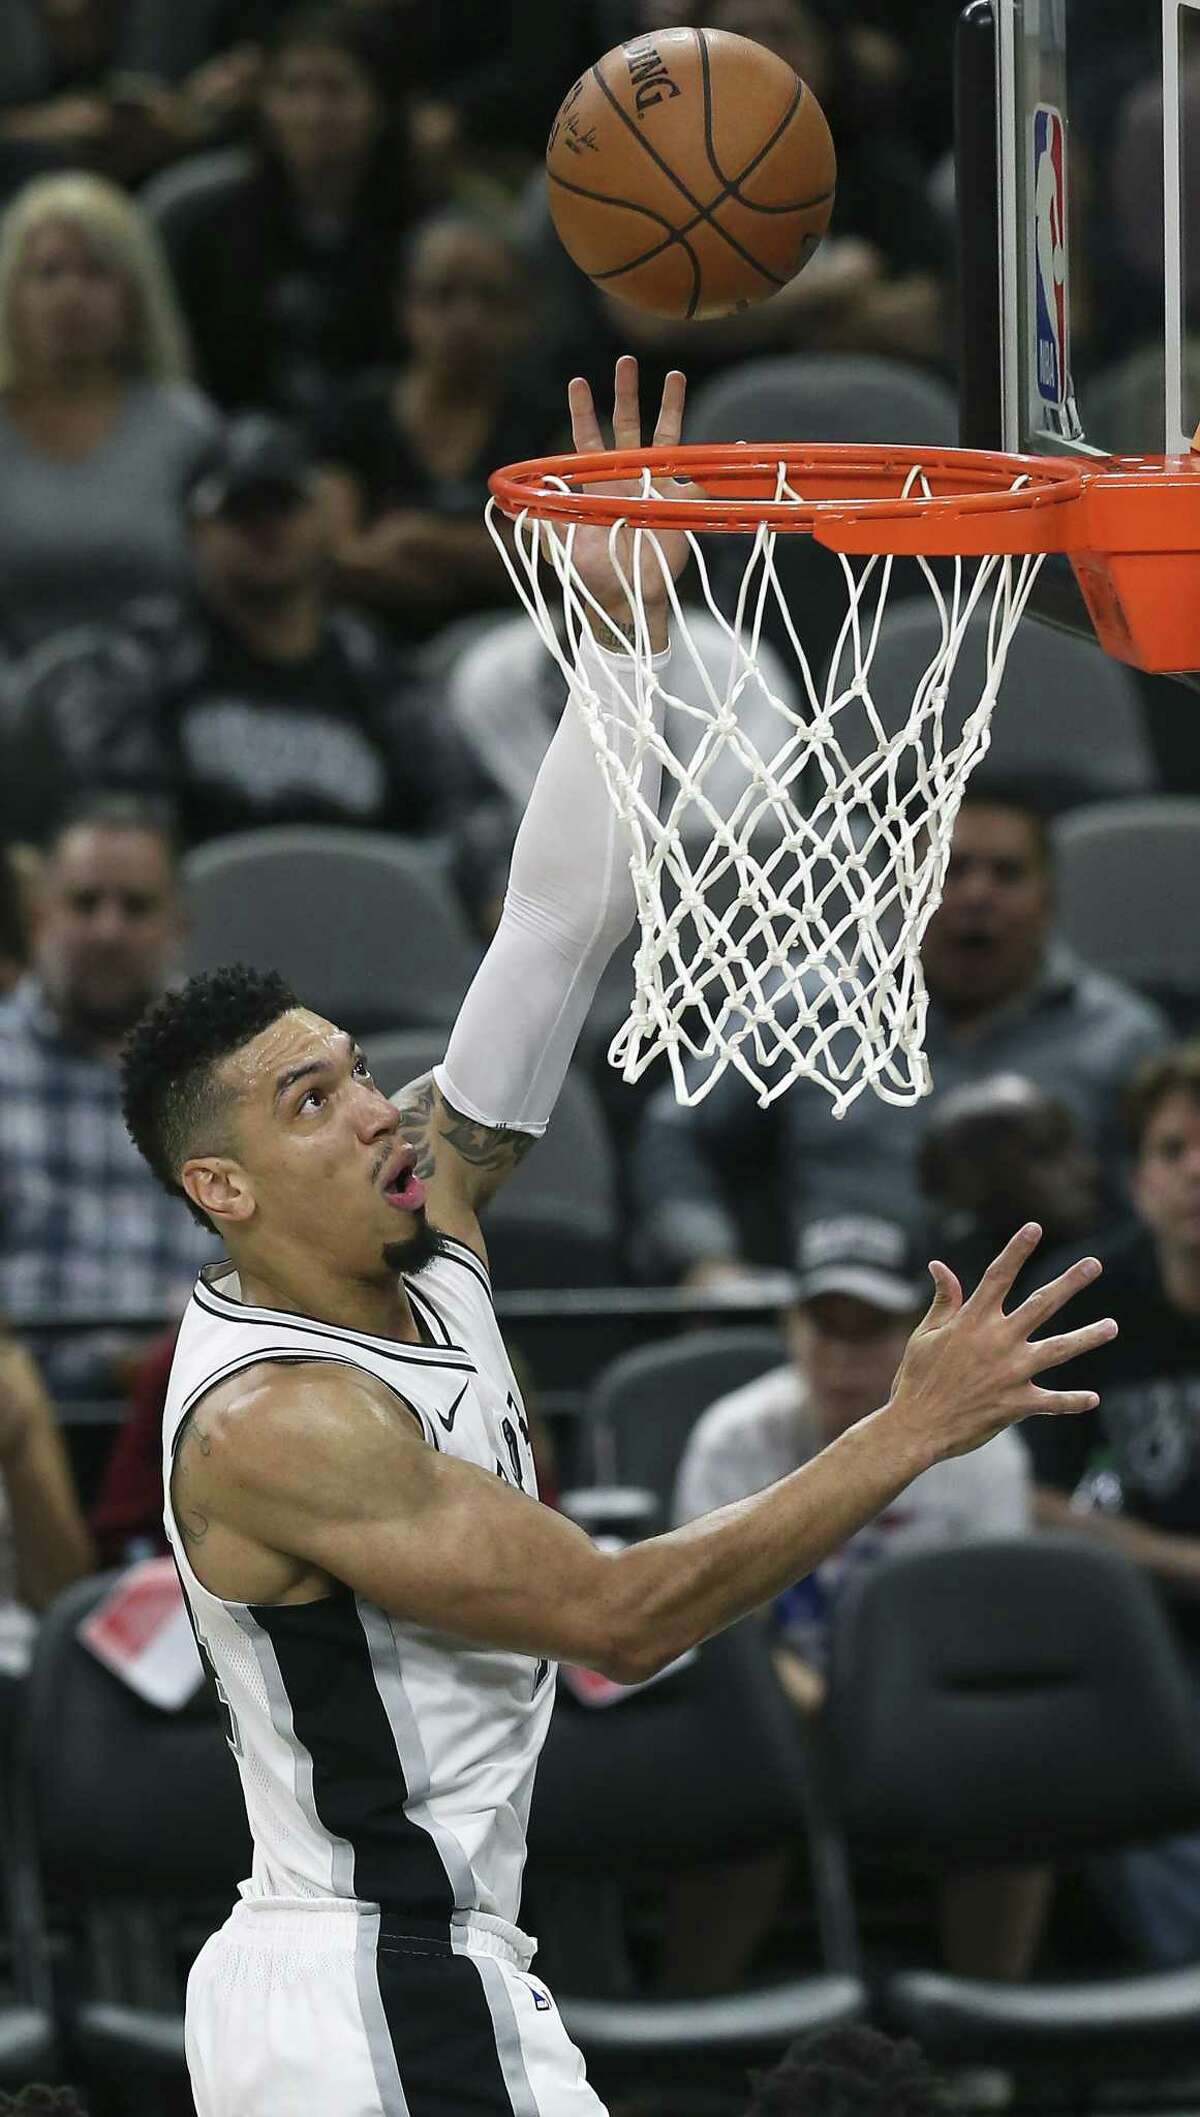 Spurs guard Danny Green gets to the hoop as the Spurs play Minnesota in the season opener on Oct. 18.